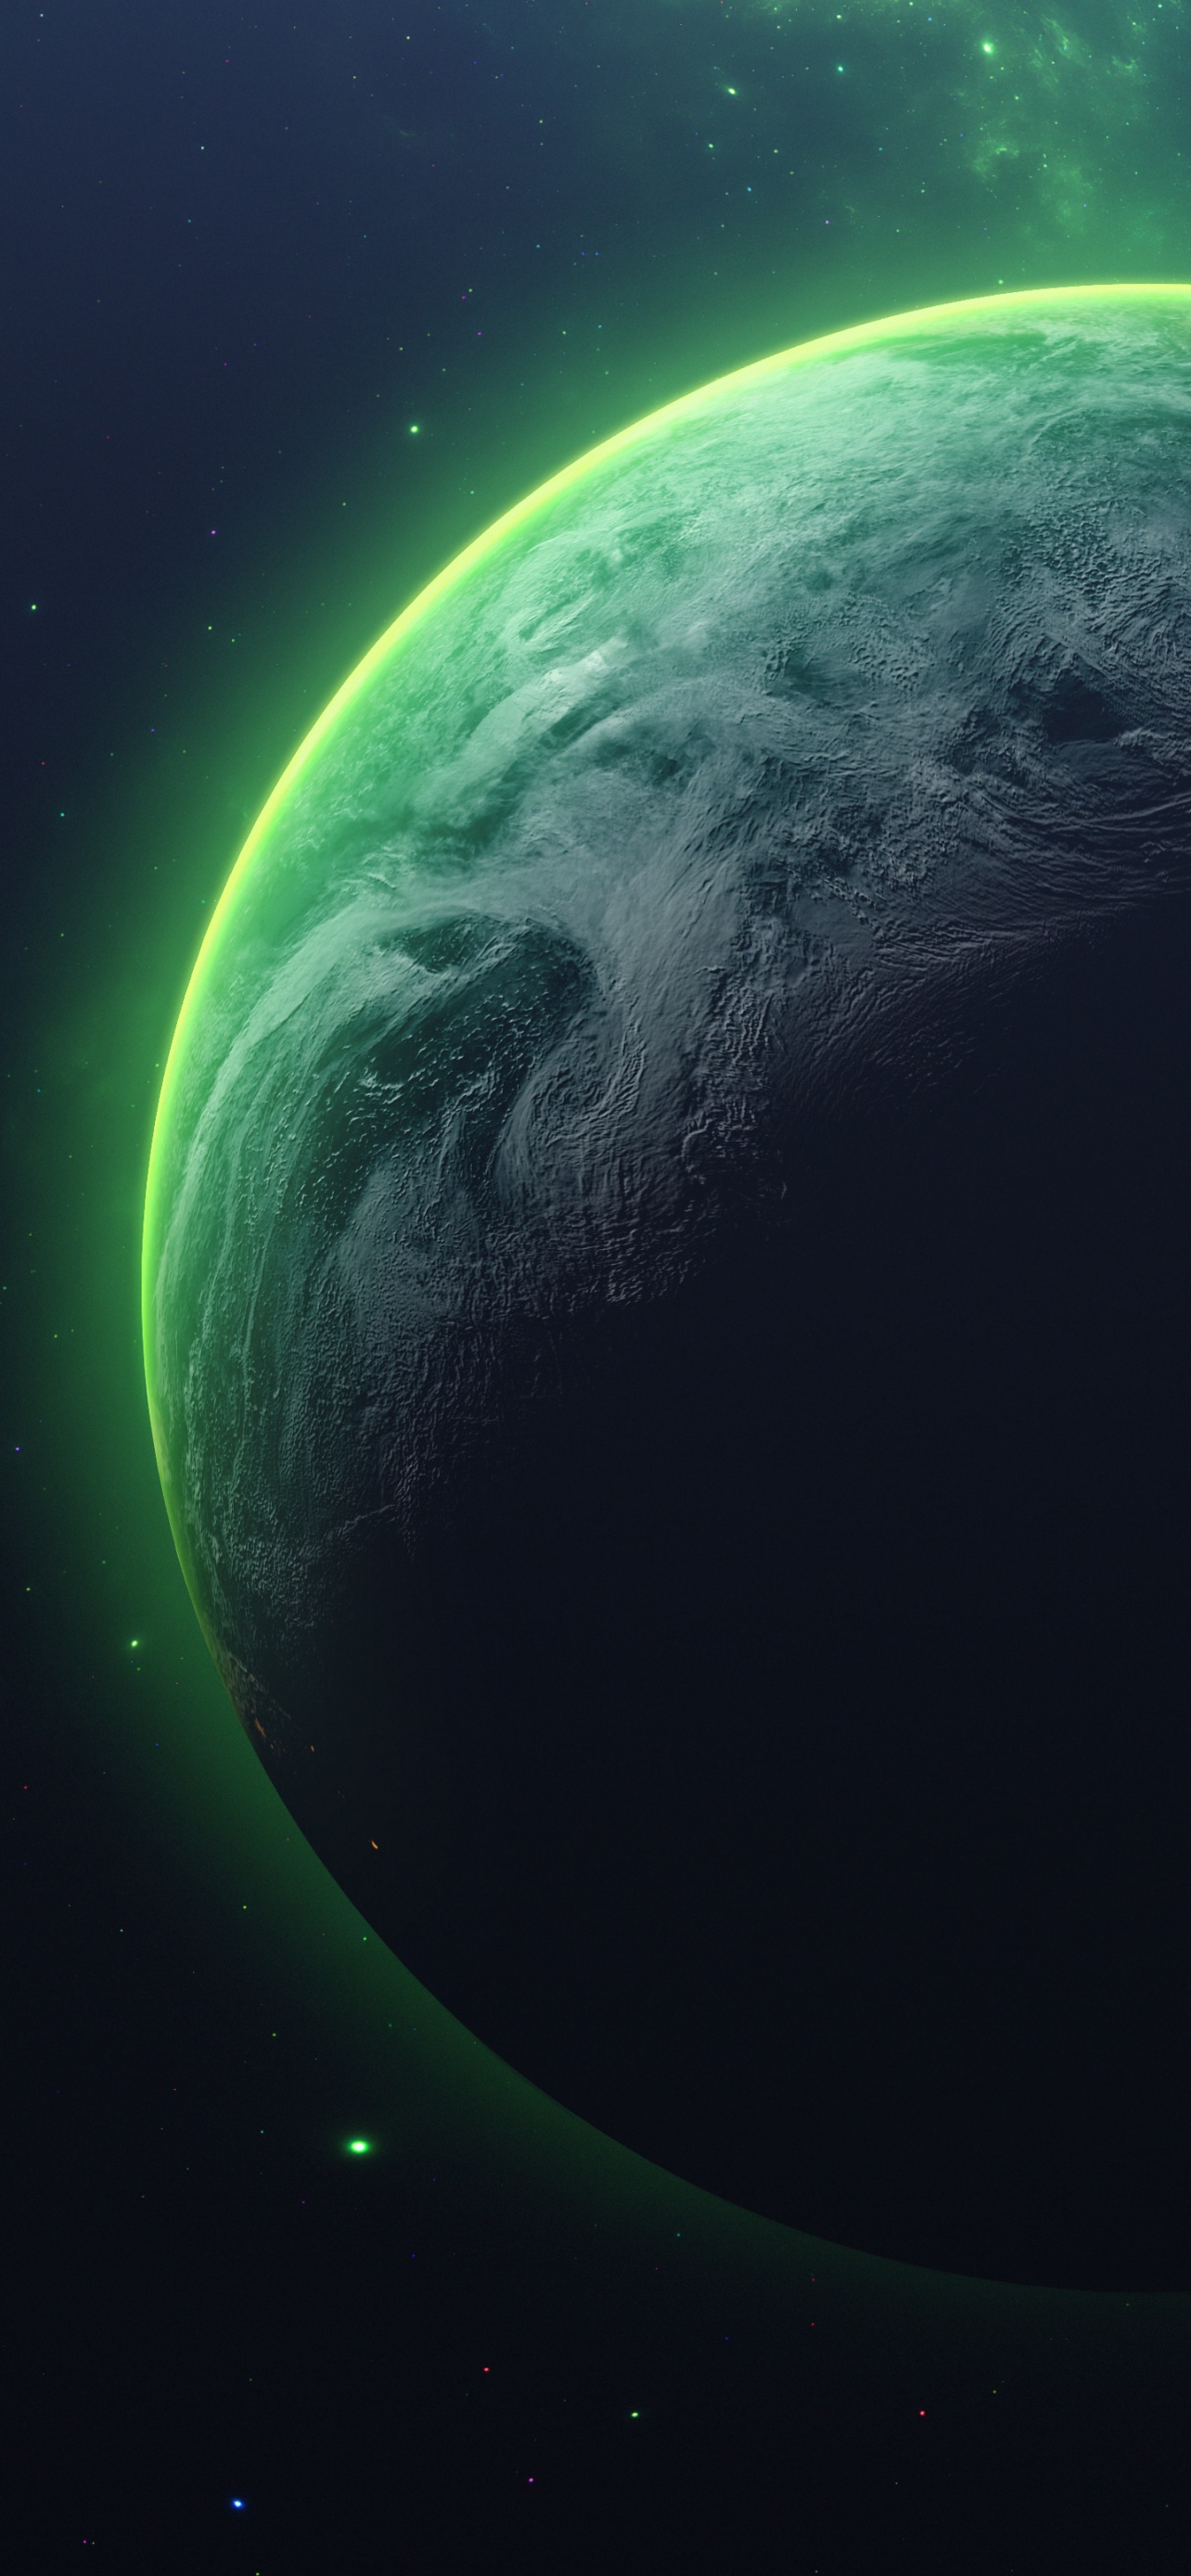 Iphone wallpaper for neon Planet + Download Wallpapers 2023